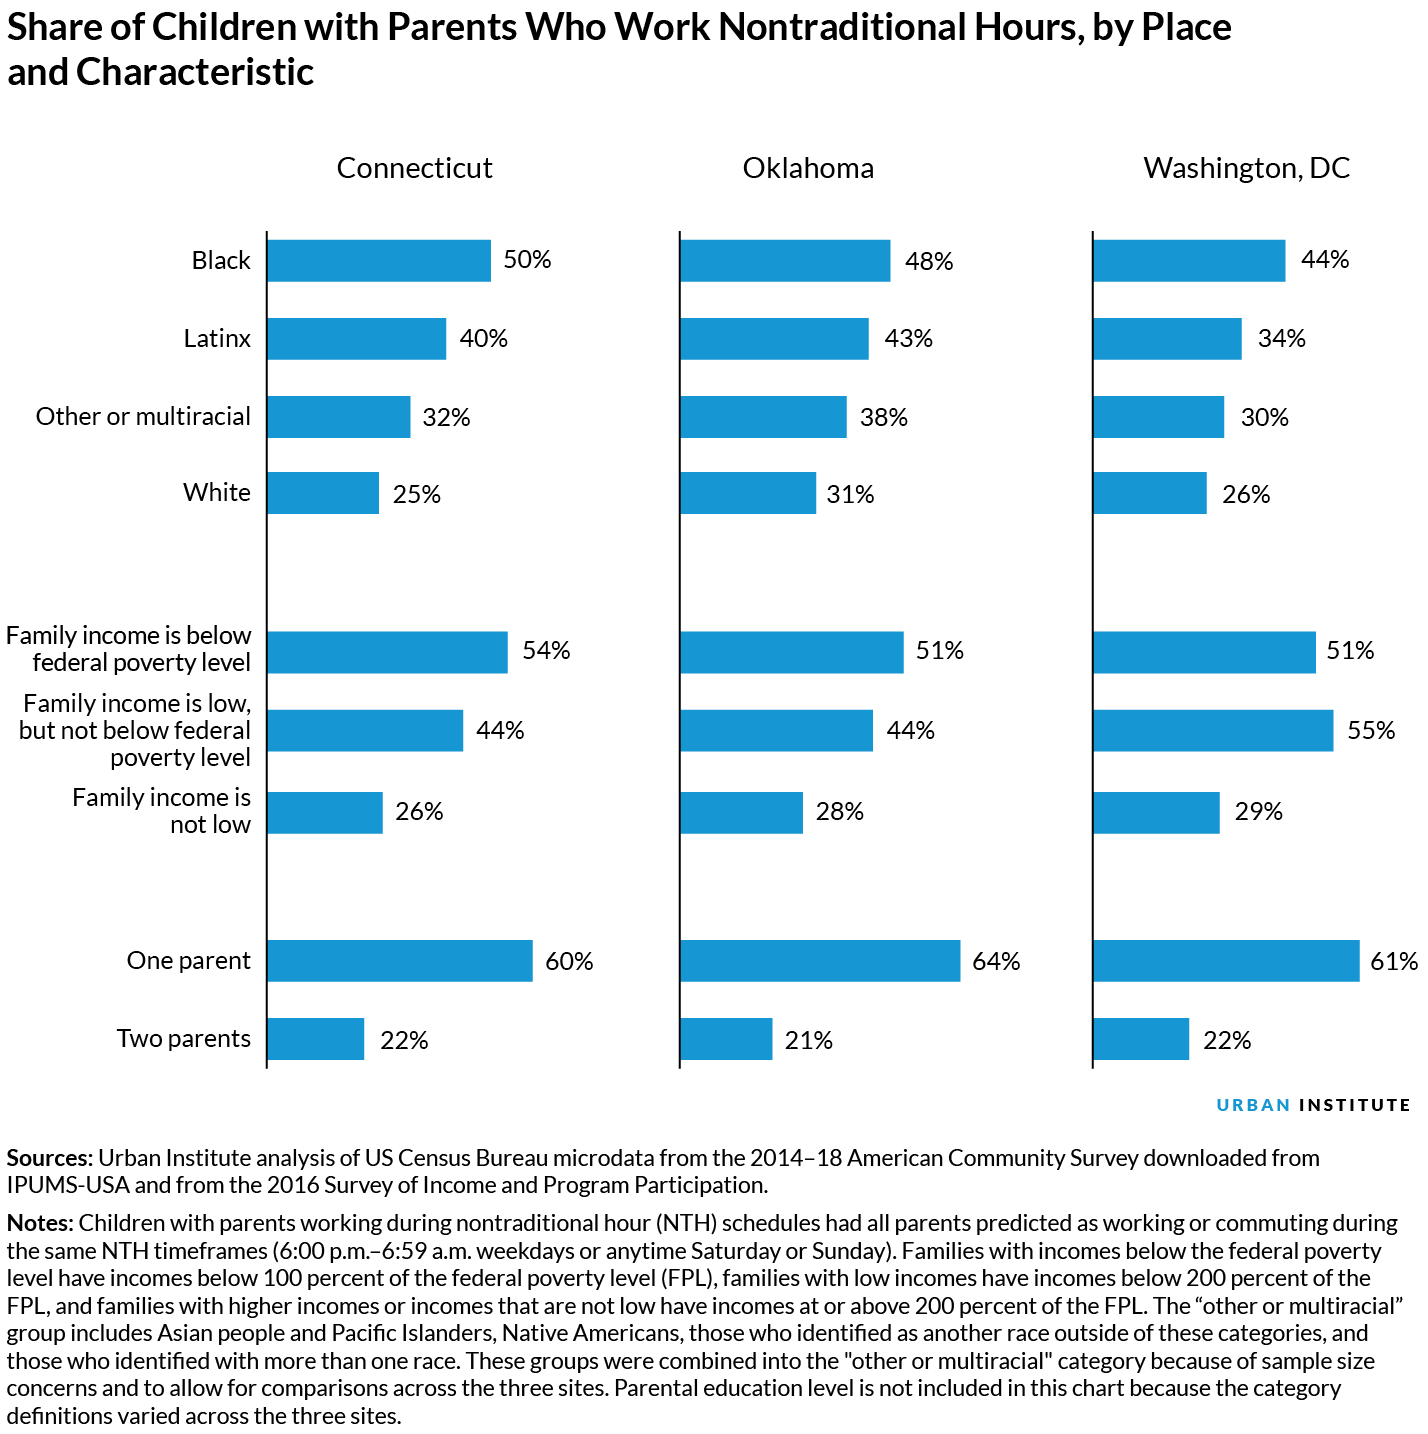 Share of kids with parents who work nontraditional hours, by place and characteristic